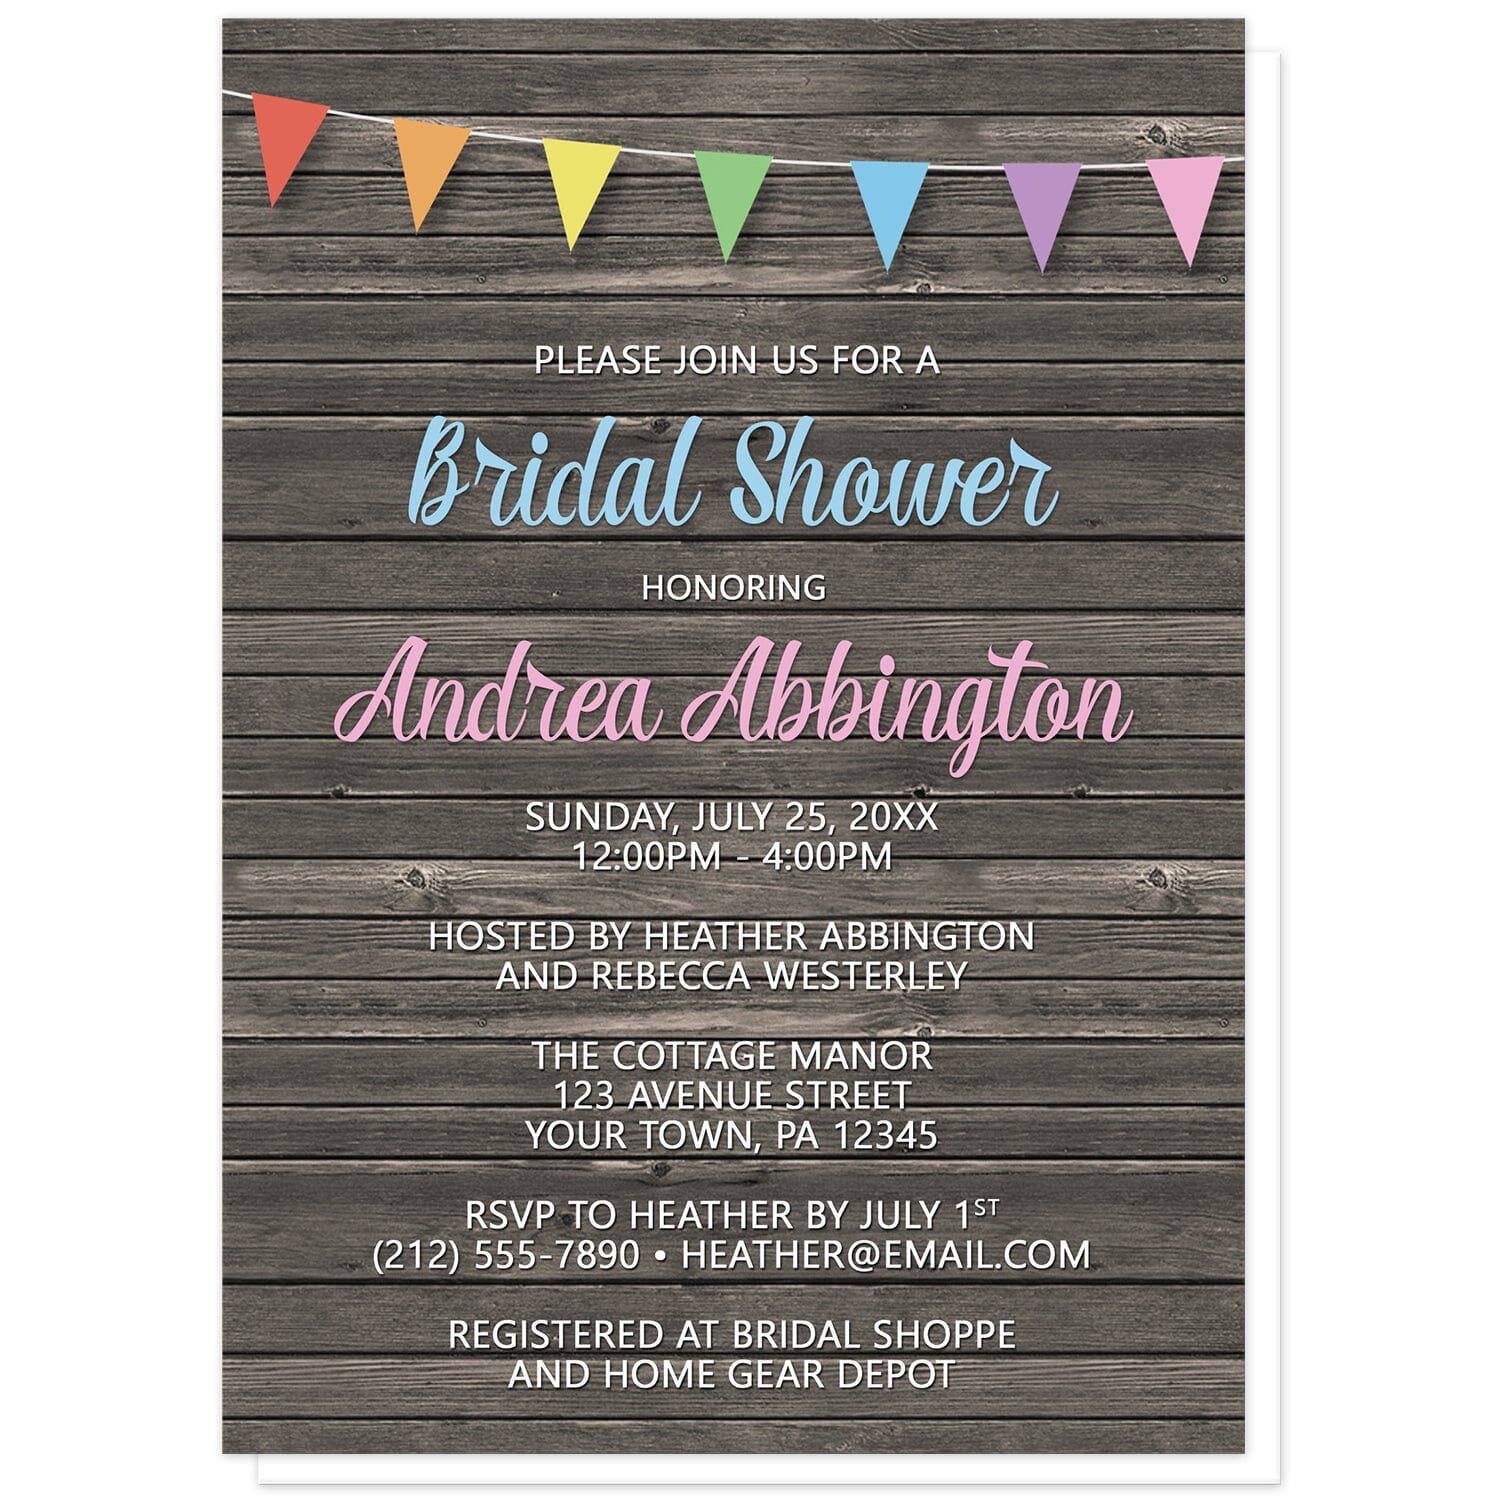 Rainbow Bunting Flags Rustic Wood Bridal Shower Invitations at Artistically Invited. Rainbow bunting flags rustic wood bridal shower invitations with a tilted pennant style rainbow bunting flags design, with the triangle flags in a rainbow progression, along the top over a dark brown country wood background. Your personalized bridal shower celebration details are custom printed in blue, pink, and white over the wood design.